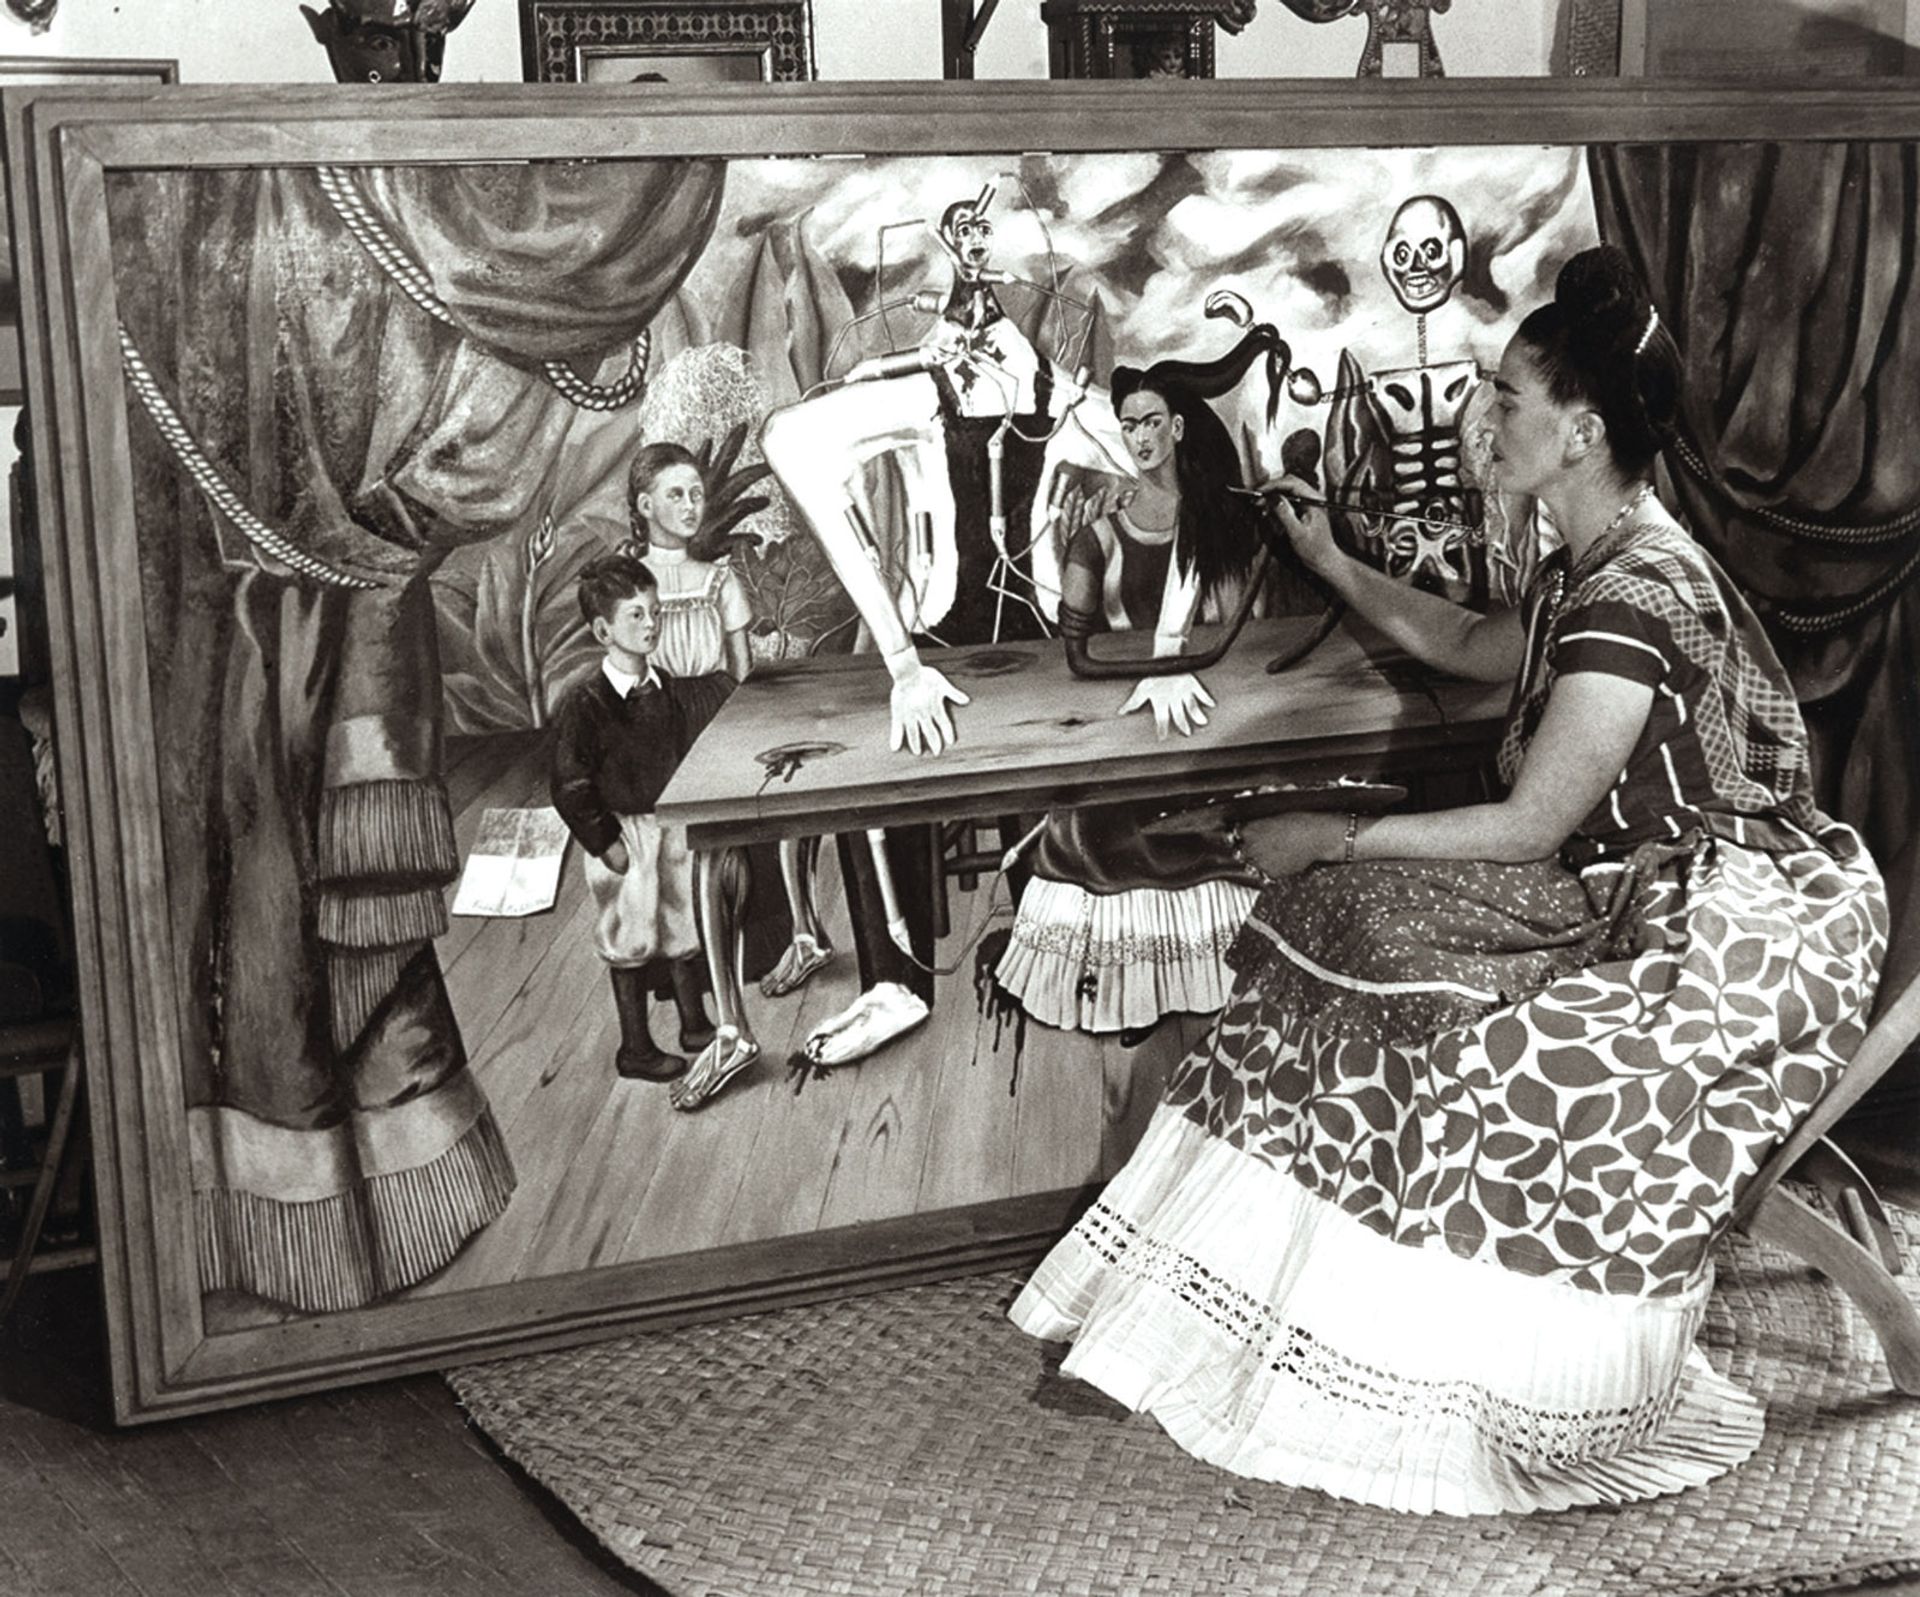 Bernard Silberstein photographed the artist with La Mesa Herida in 1941, a year after she finished the work Edward B. Silberstein/Courtesy of Cincinnati Art Museum/© 2018 Banco de México Diego Rivera Frida Kahlo Museums Trust, Mexico, D.F./Artists Rights Society (ARS), New York